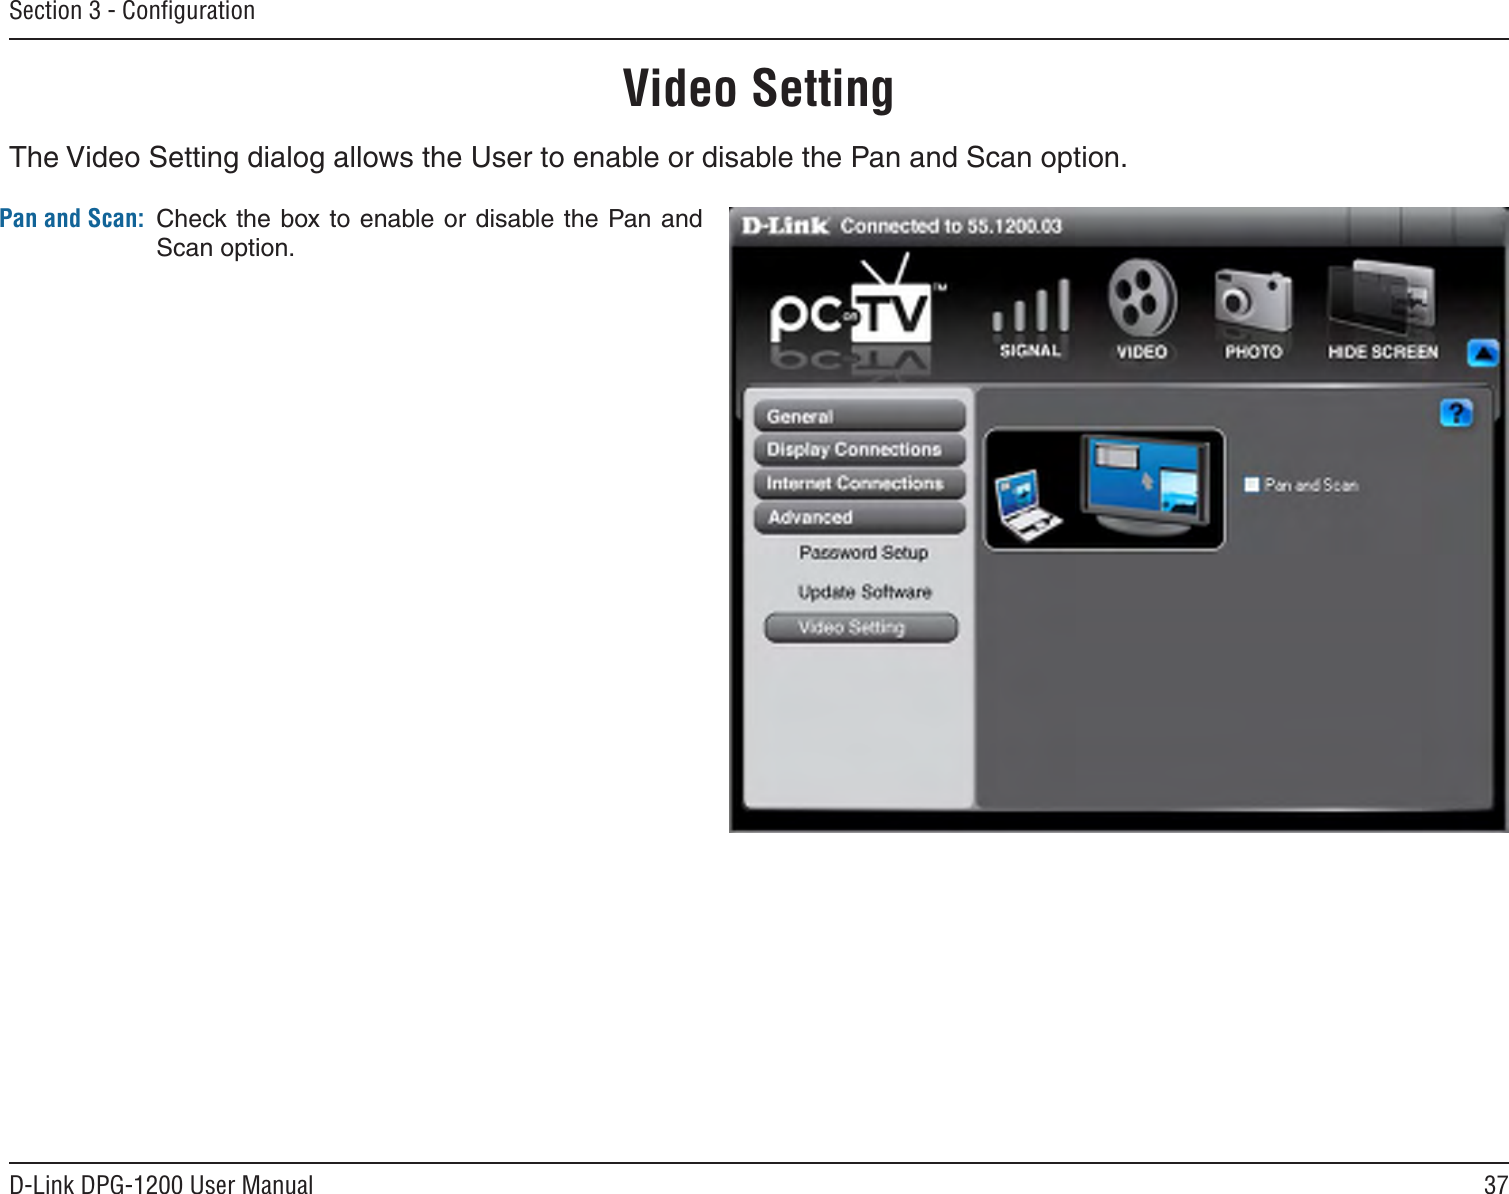 37D-Link DPG-1200 User ManualSection 3 - ConﬁgurationPan and Scan: Check the  box to  enable or disable the Pan and Scan option.Video SettingThe Video Setting dialog allows the User to enable or disable the Pan and Scan option.